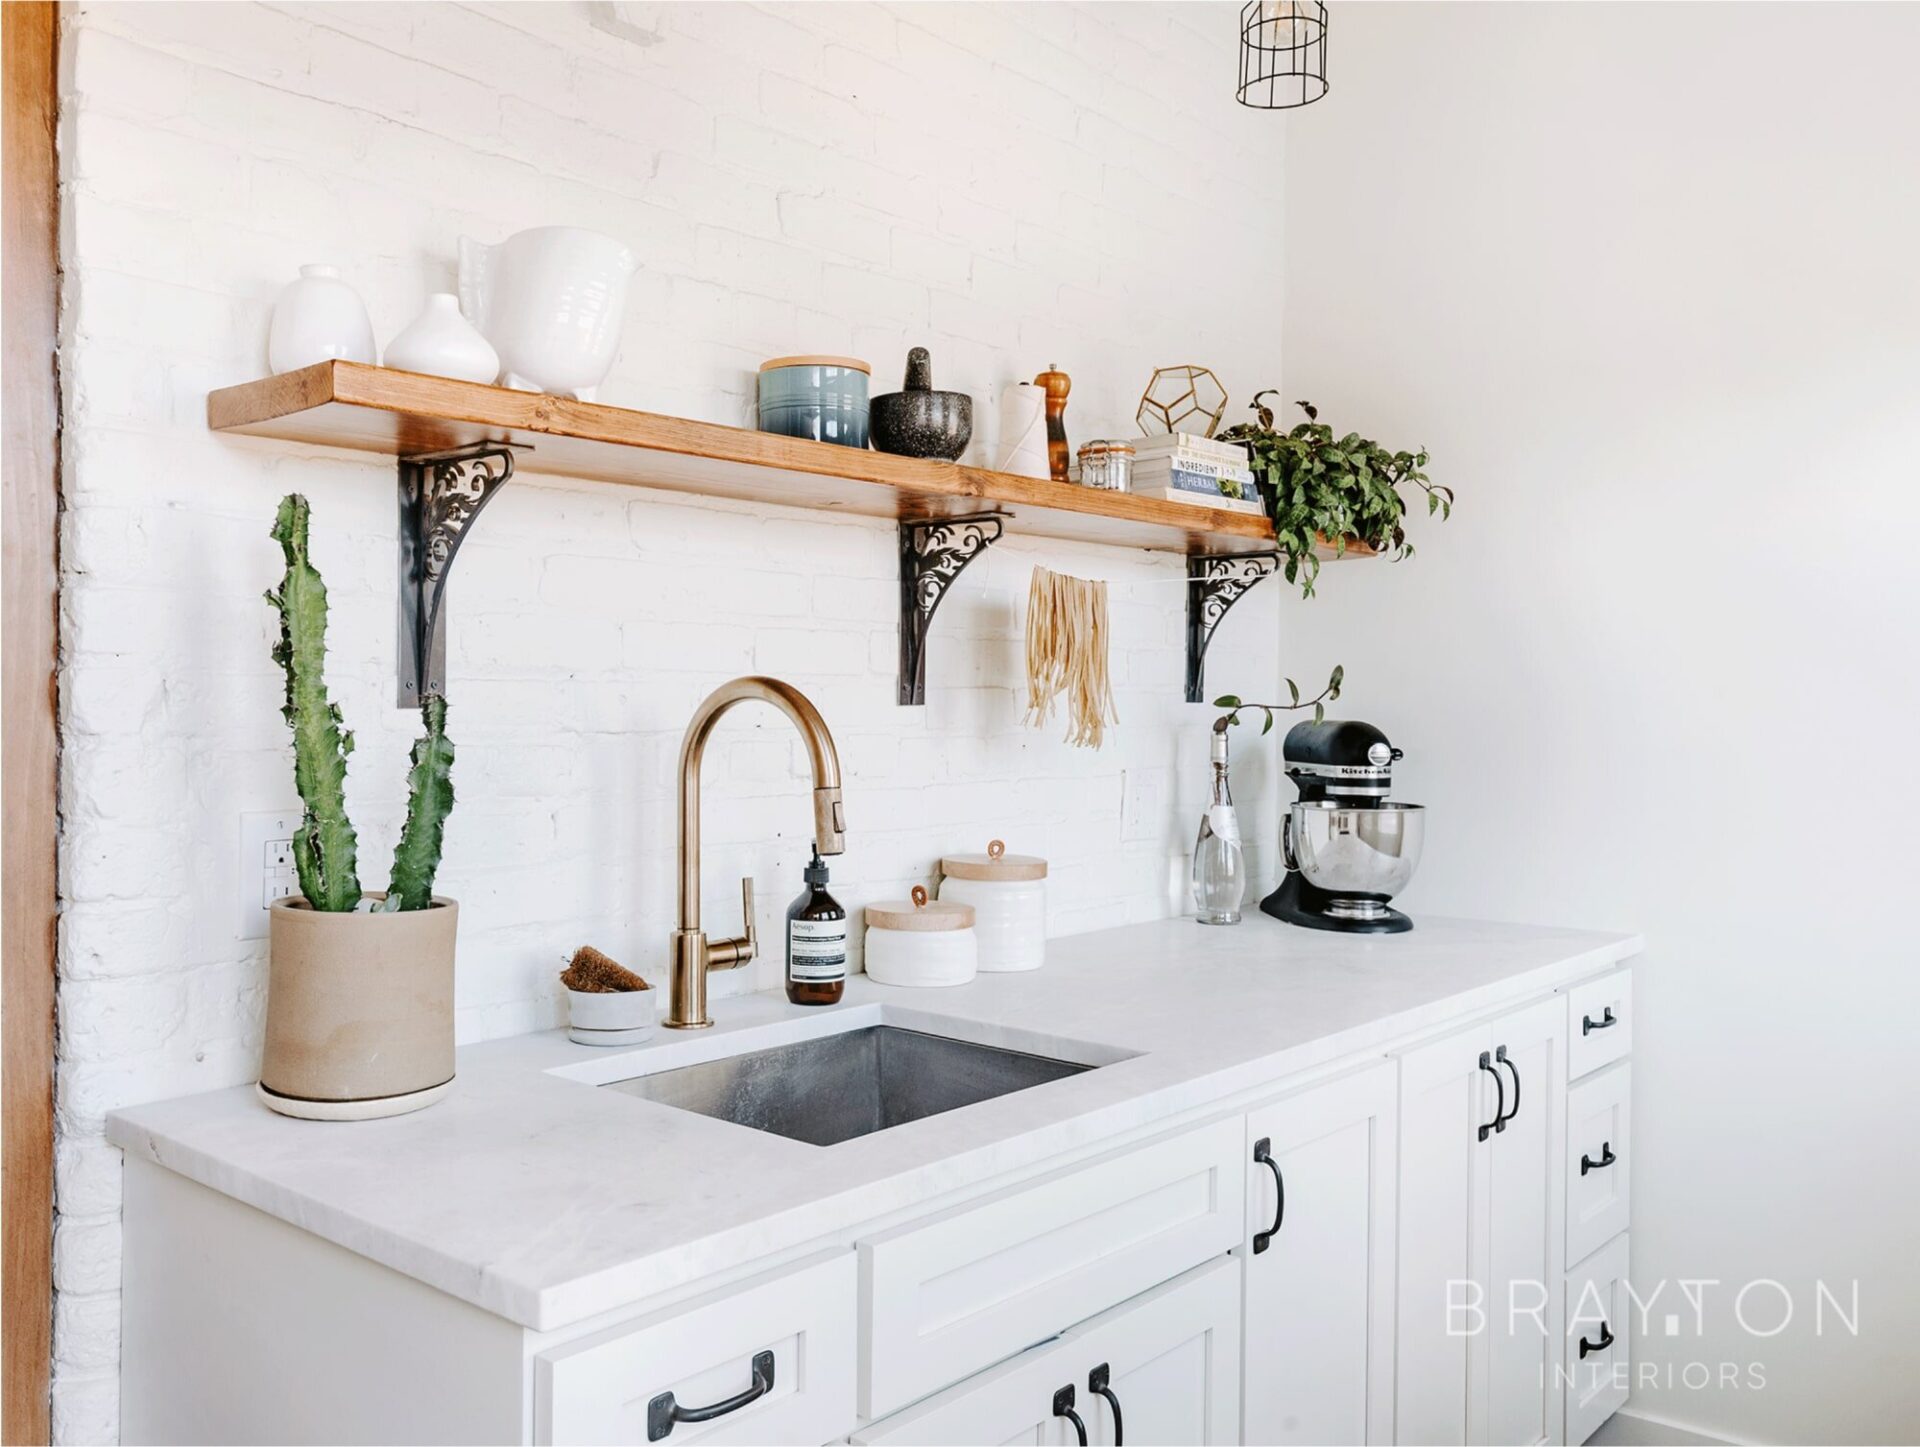 Real marble countertops, brass plumbing fixtures and slate flooring stay true to the original architecture in this historic Denver Highlands townhome.